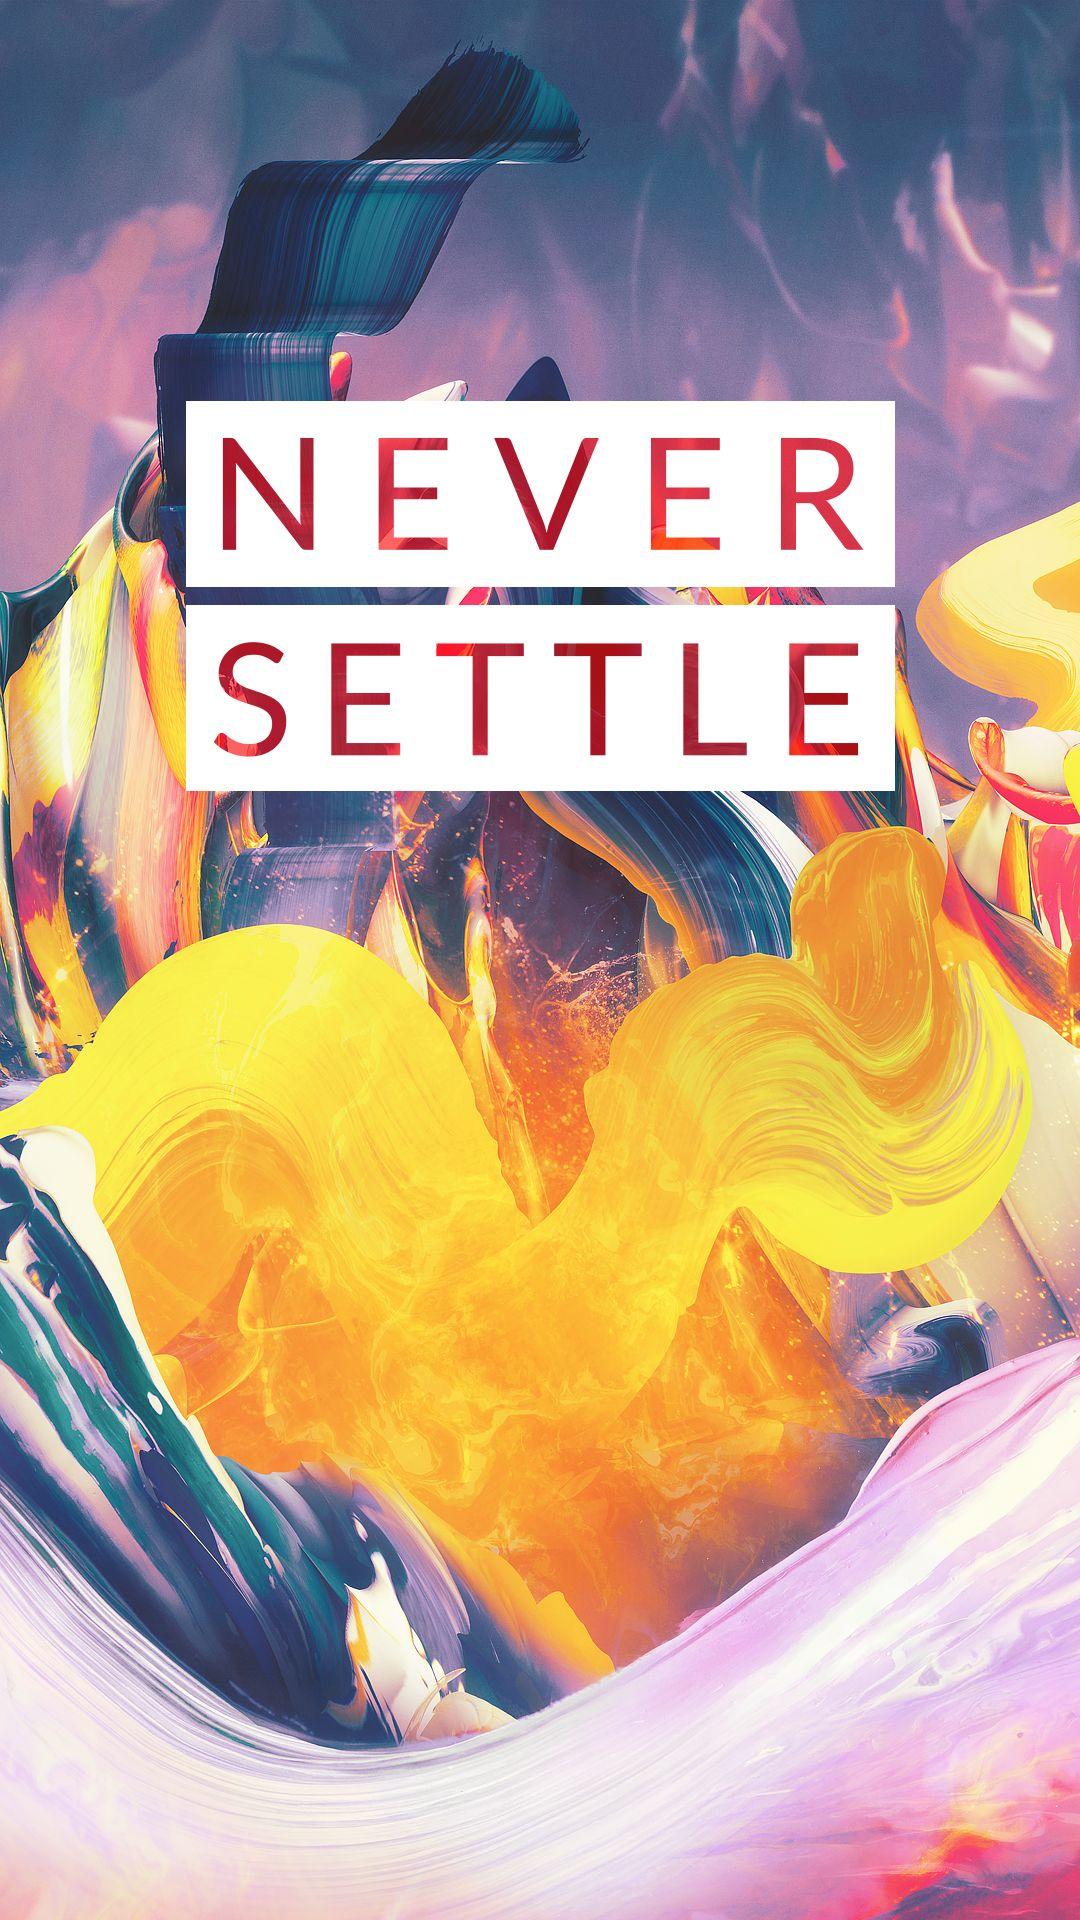 Download OnePlus 3T Never Settle 1080 x 1920 Wallpaper